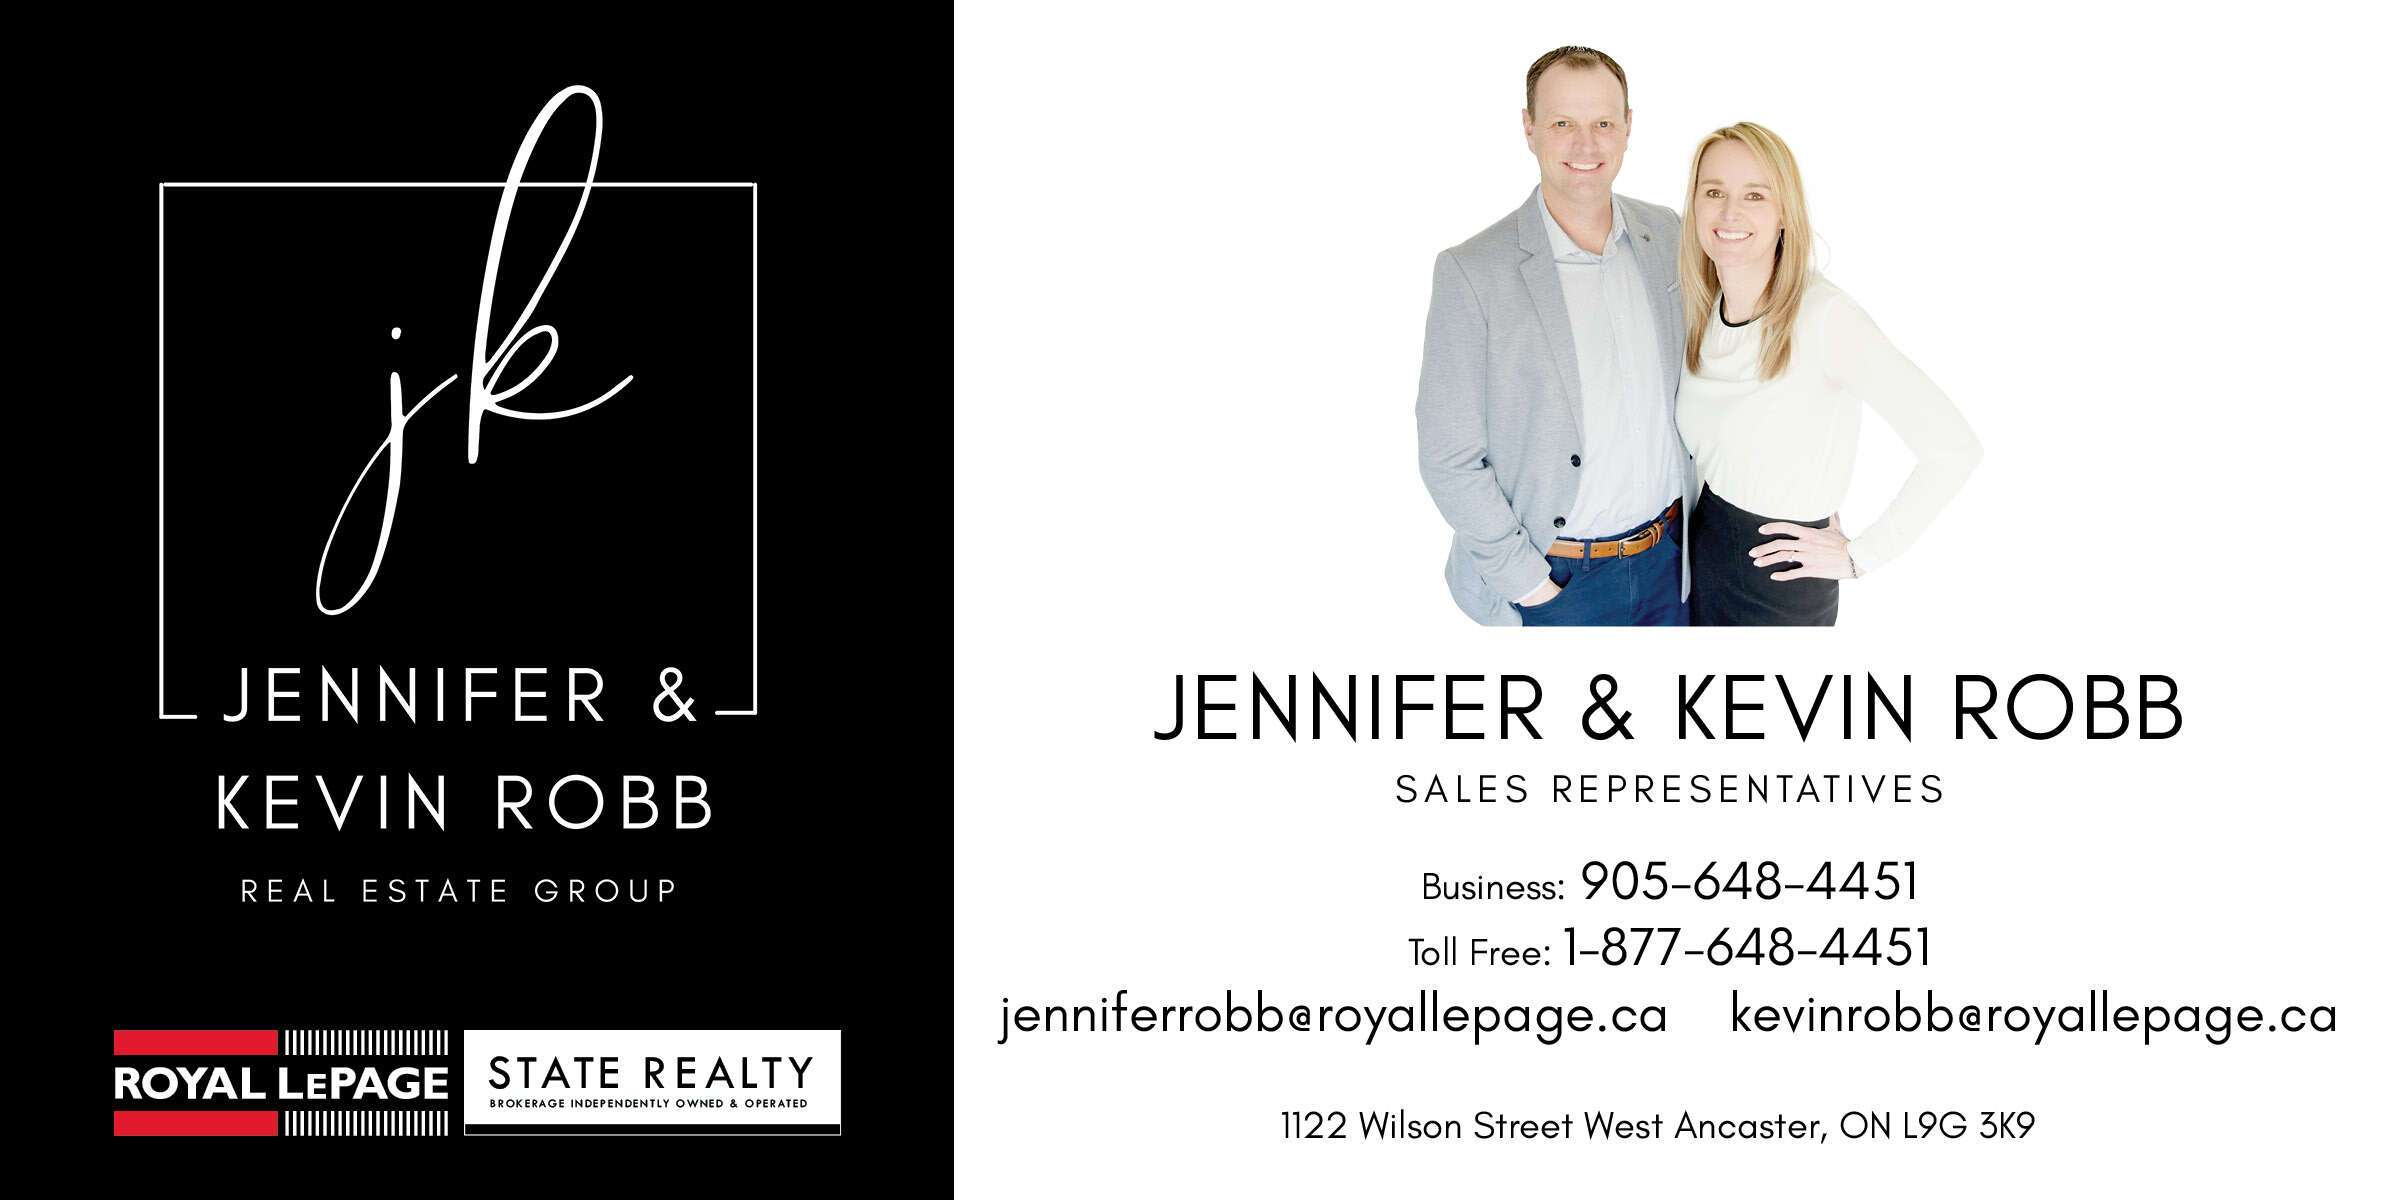 Jennifer and Kevin Robb Real Estate Group